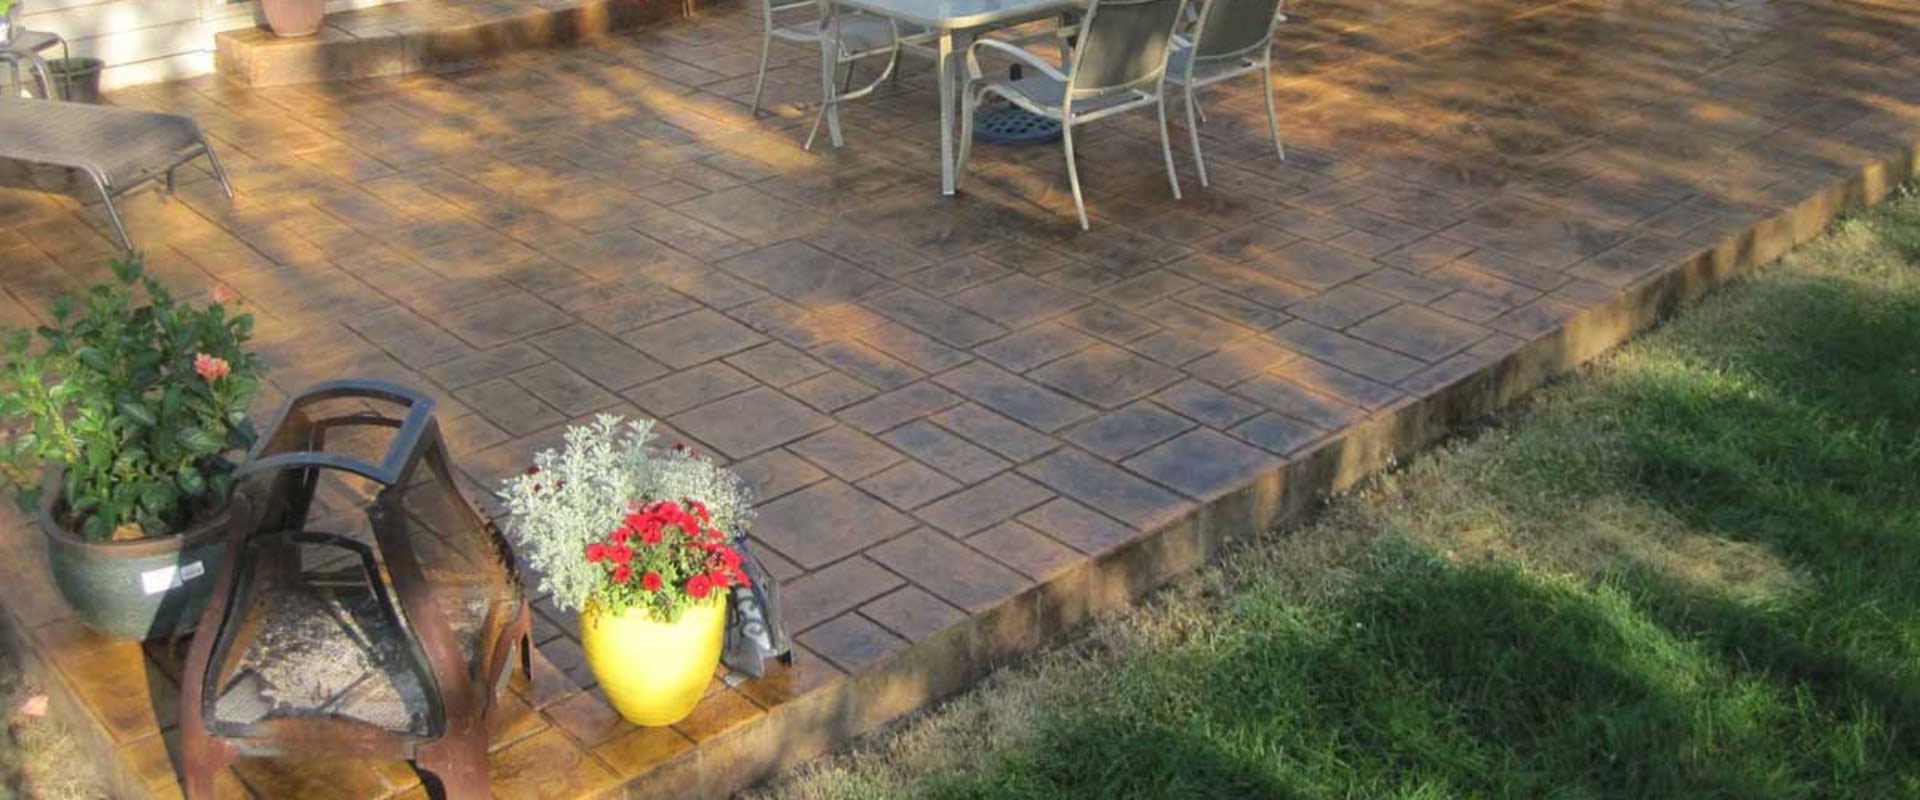 Smooth Finish: A Look at One of the Most Popular Types of Stamped Concrete Textures